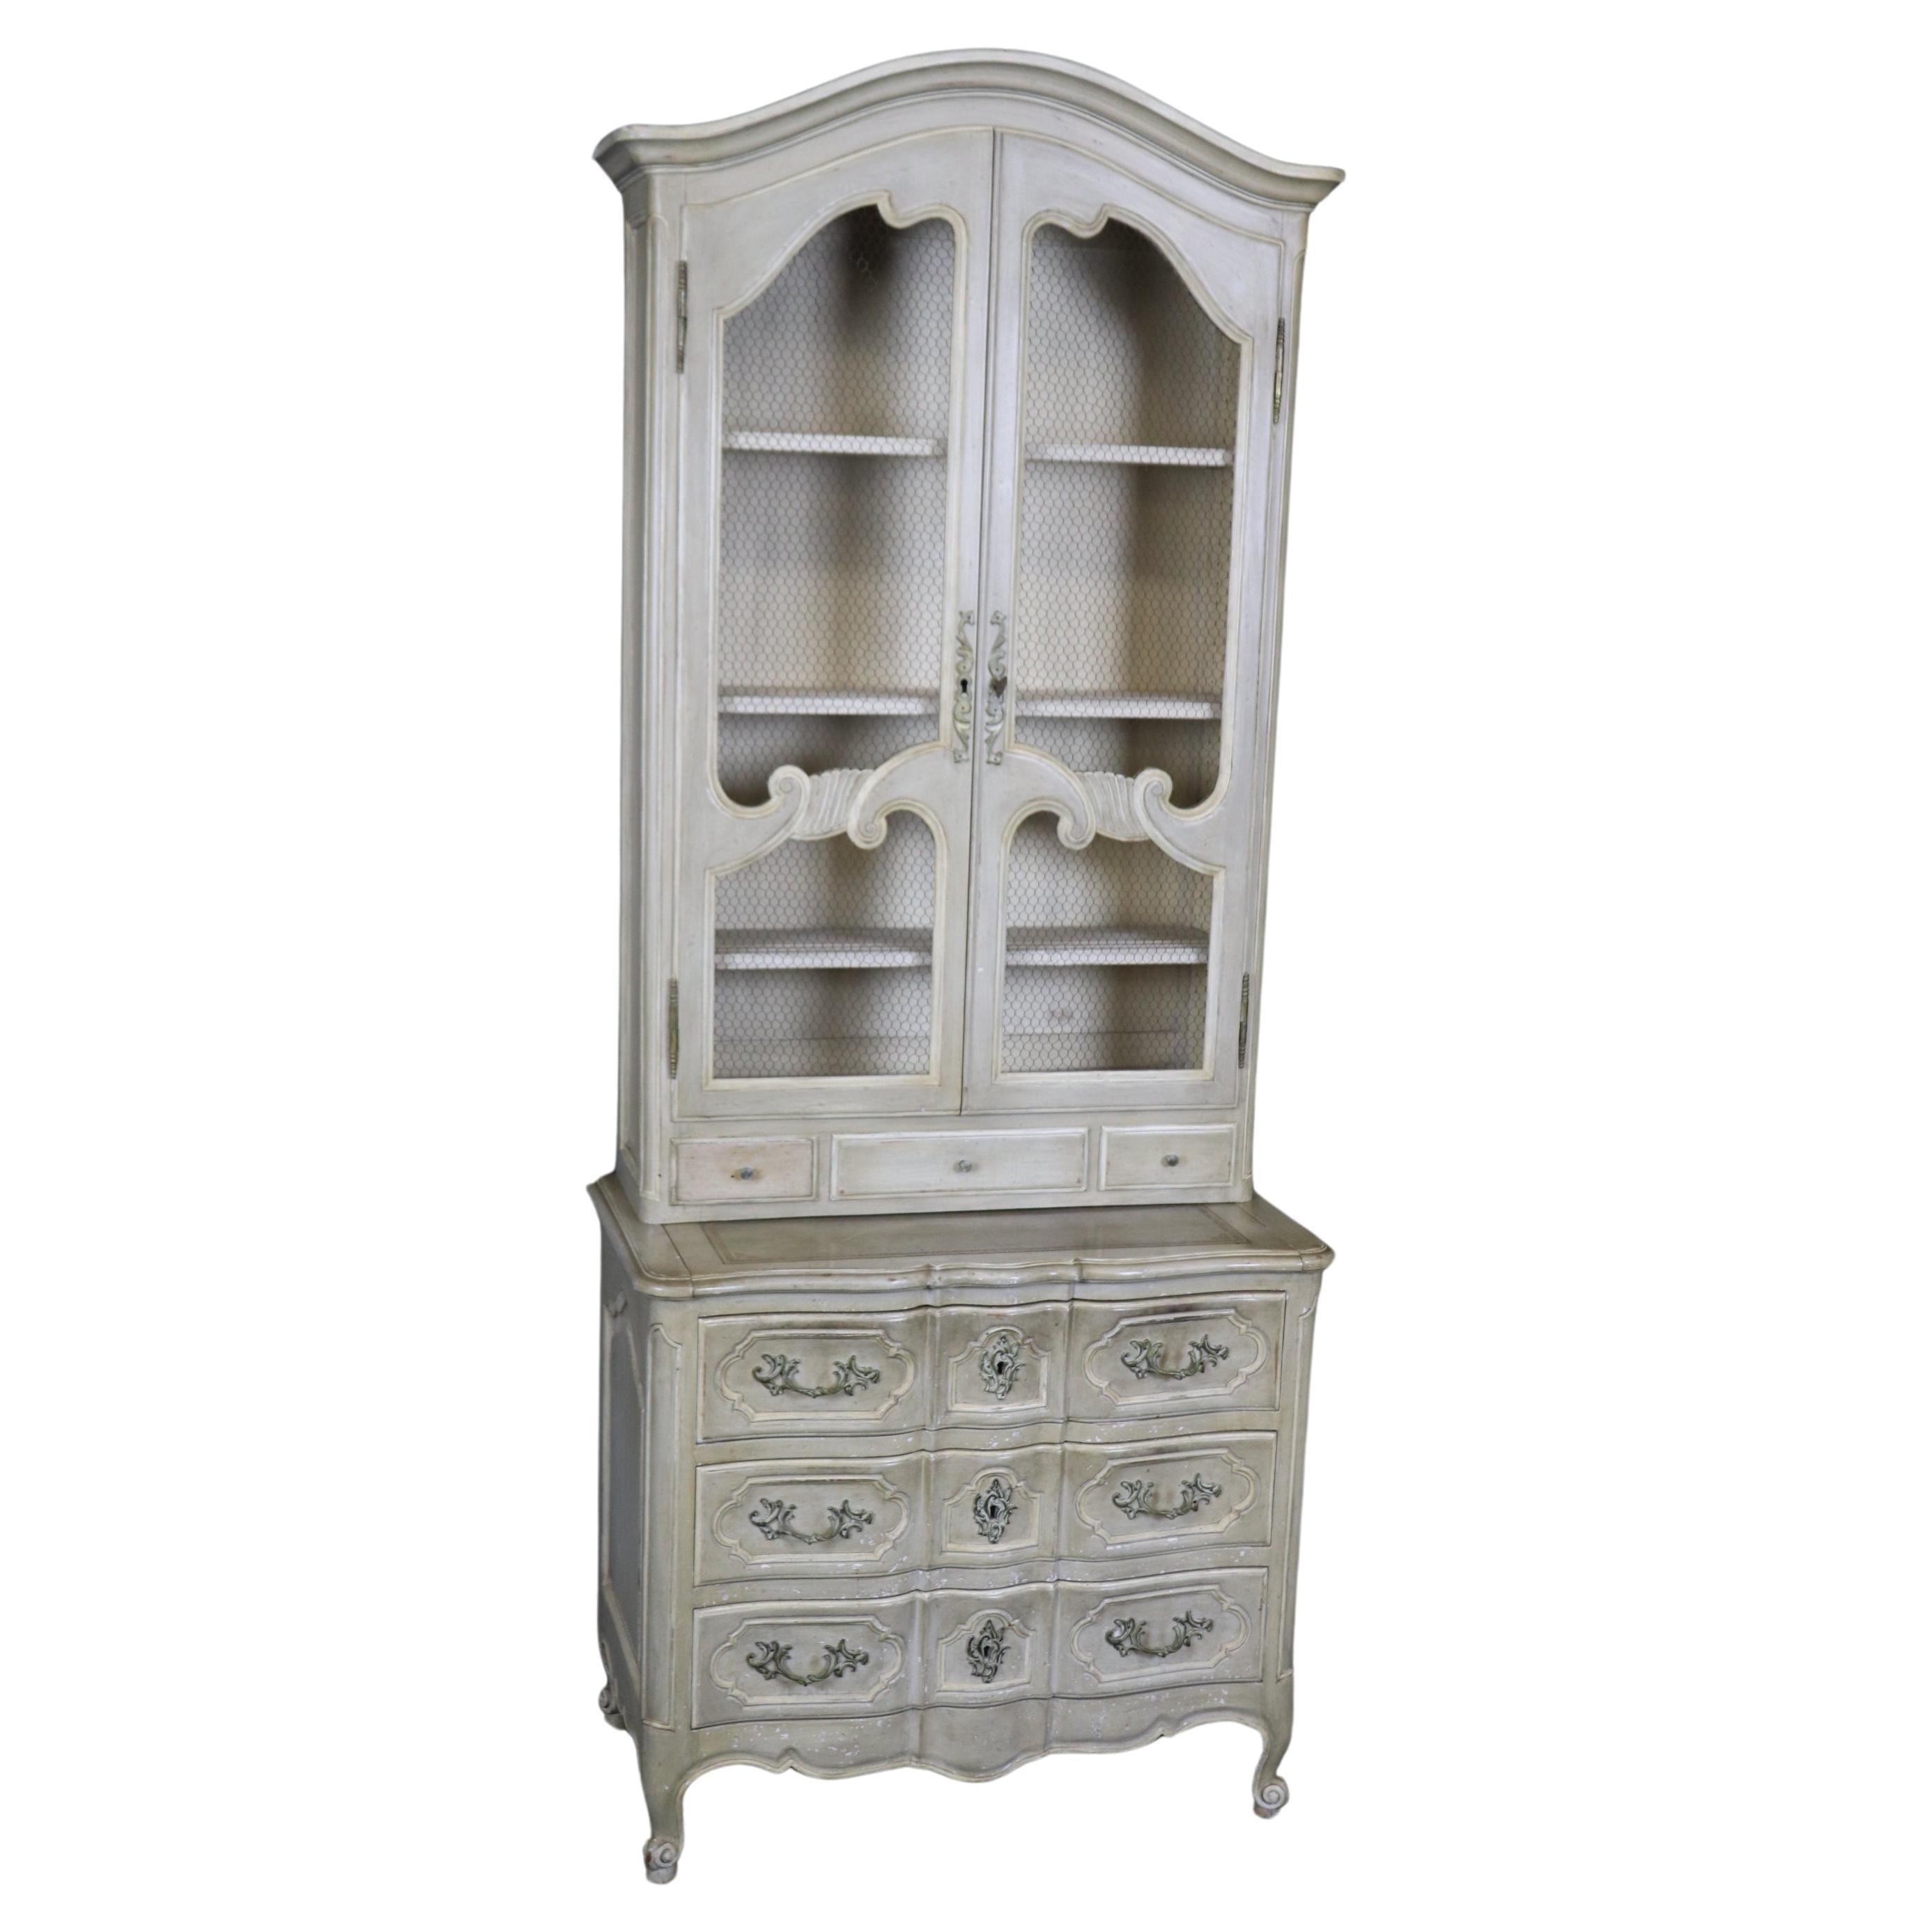 Superb Shallow Depth French Country Painted Mesh Door Secretary Desk 